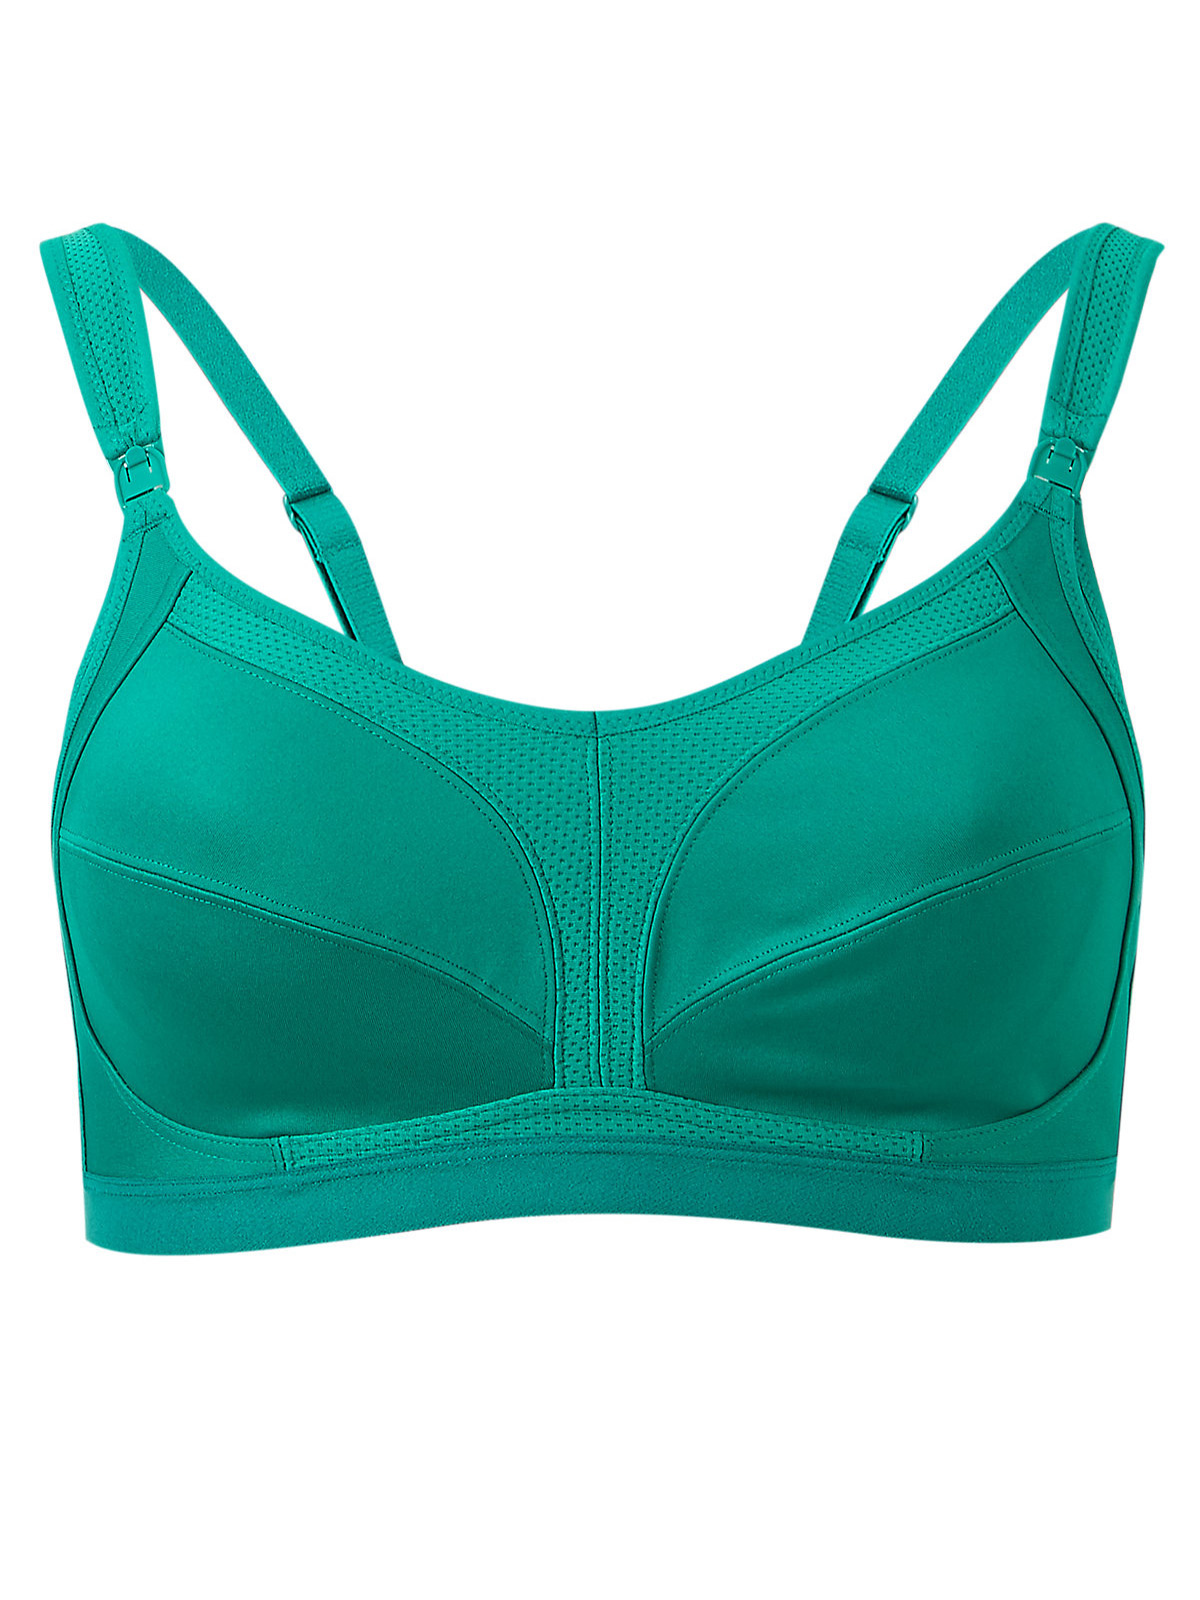 Marks and Spencer - - M&5 EMERALD High Impact Non-Wired Maternity ...